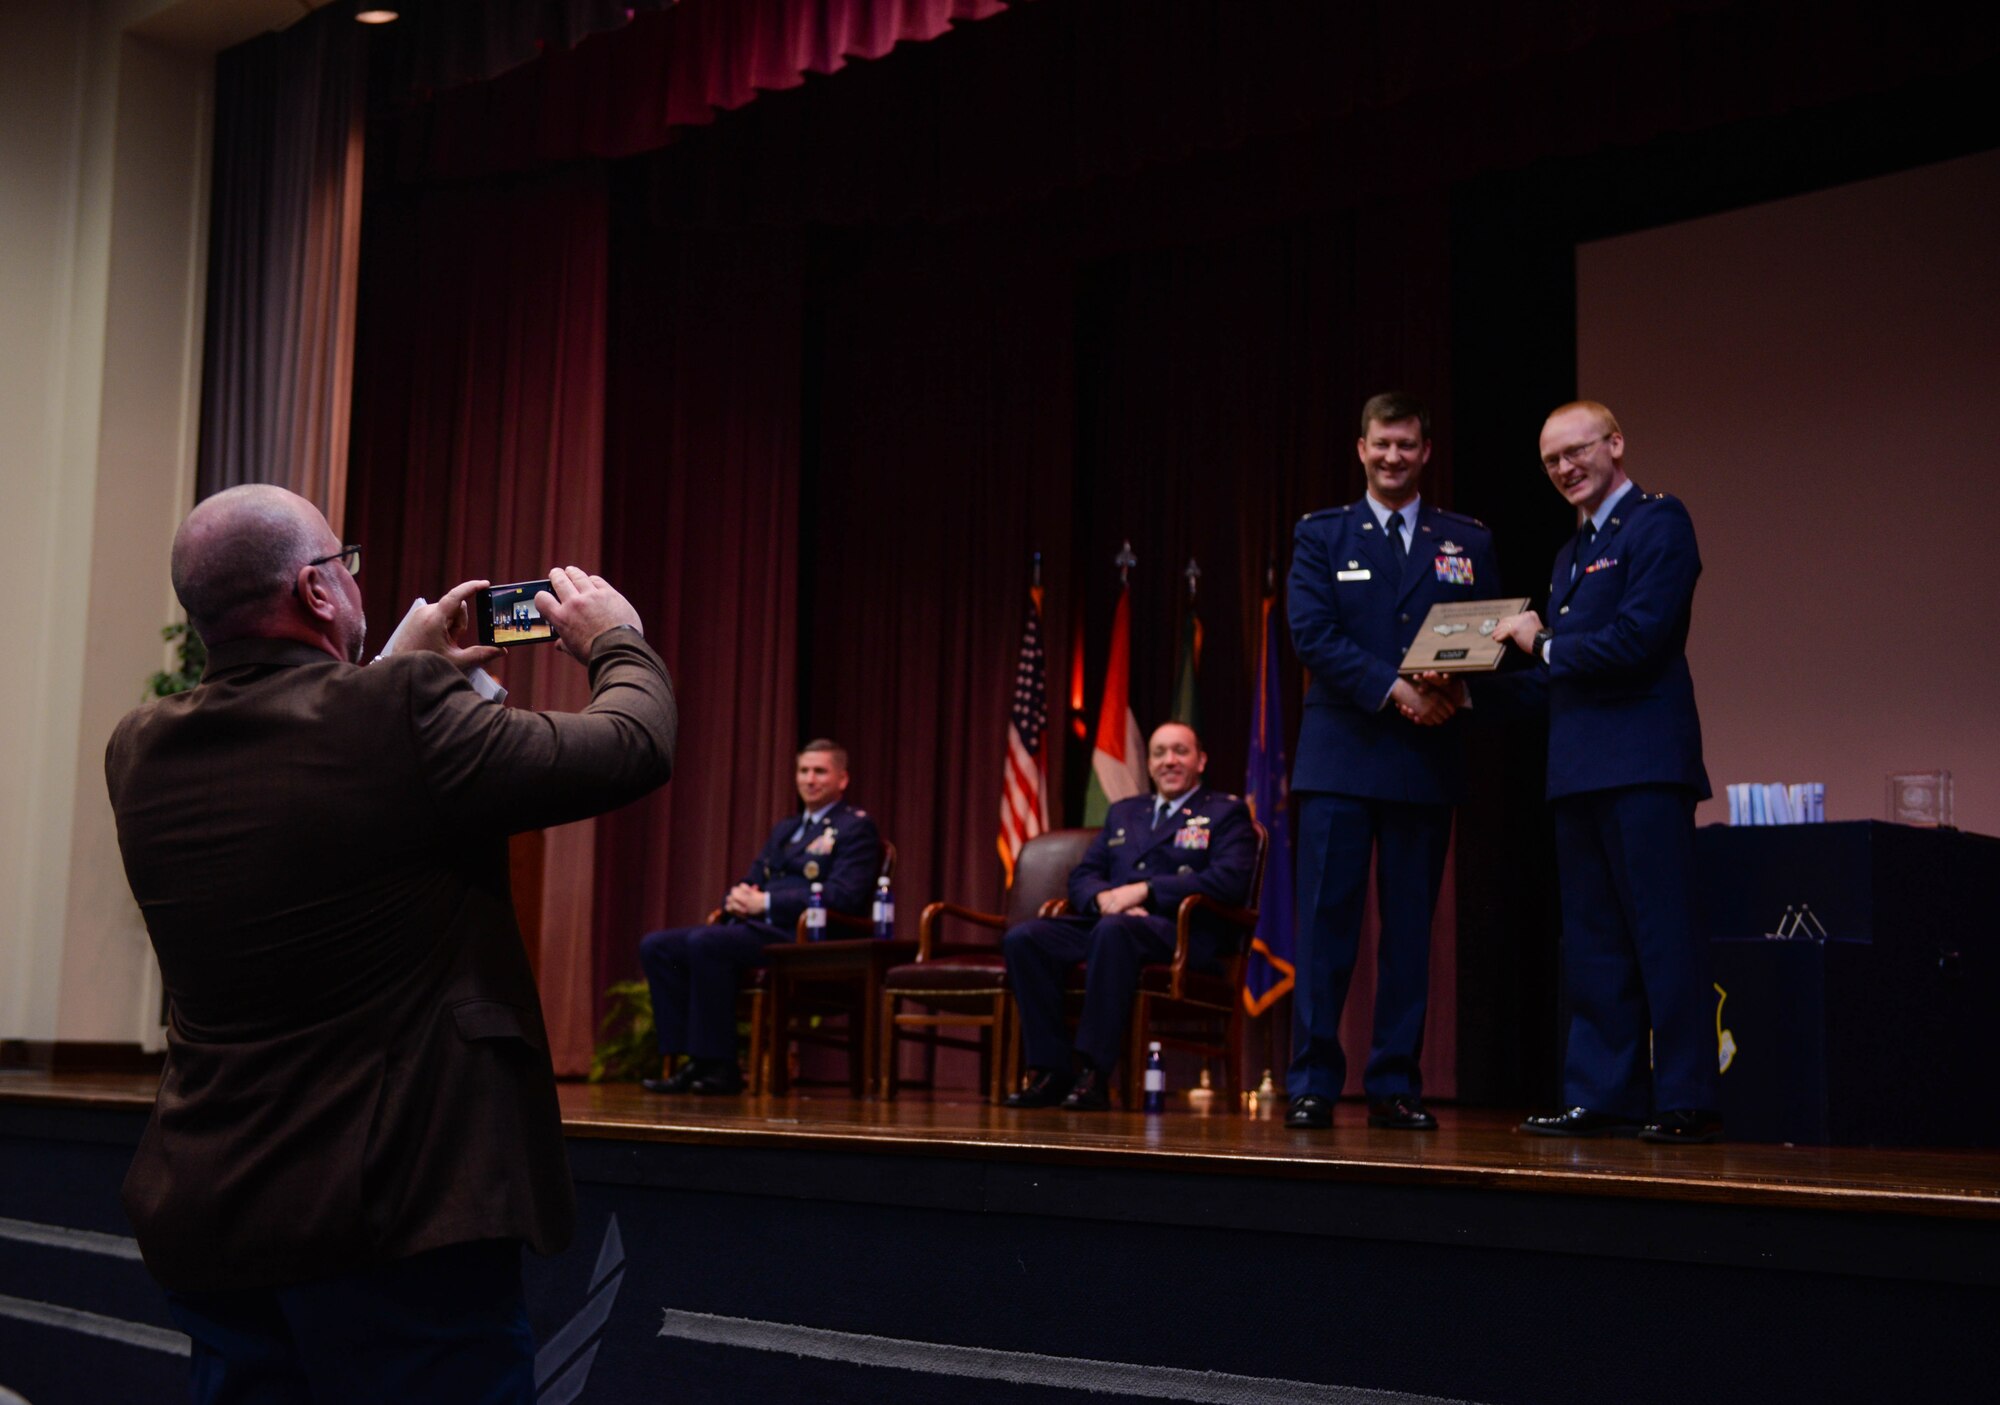 Col. Clinton ZumBrunnen, 437th Airlift Wing commander at Joint Base Charleston, South Carolina, takes a photo with a graduate from Specialized Undergraduate Pilot Training Class 20-03 while family members take photos Nov. 15, 2019, at Columbus Air Force Base, Miss. ZumBrunnen was the guest speaker for SUPT Class 20-03’s graduation ceremony. (U.S. Air Force photo by Airman Davis Donaldson)